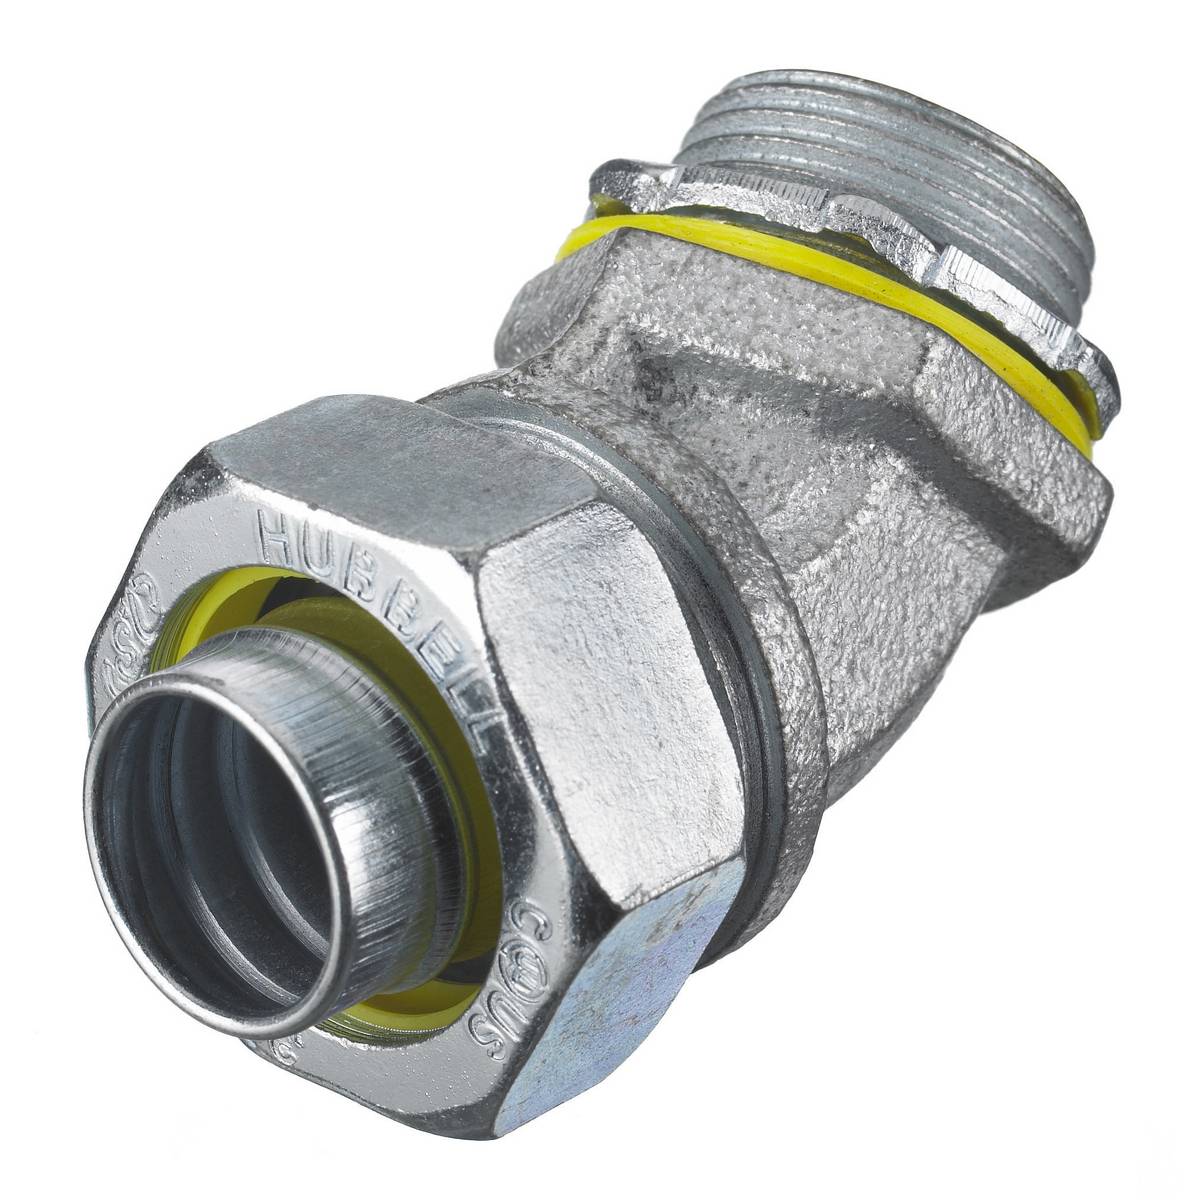 Wiring Device-Kellems H1504 Non-Insulated Male Metallic Liquidtight Connector, 1-1/2 in Trade, 45 deg, Iron/Steel, Zinc Plated